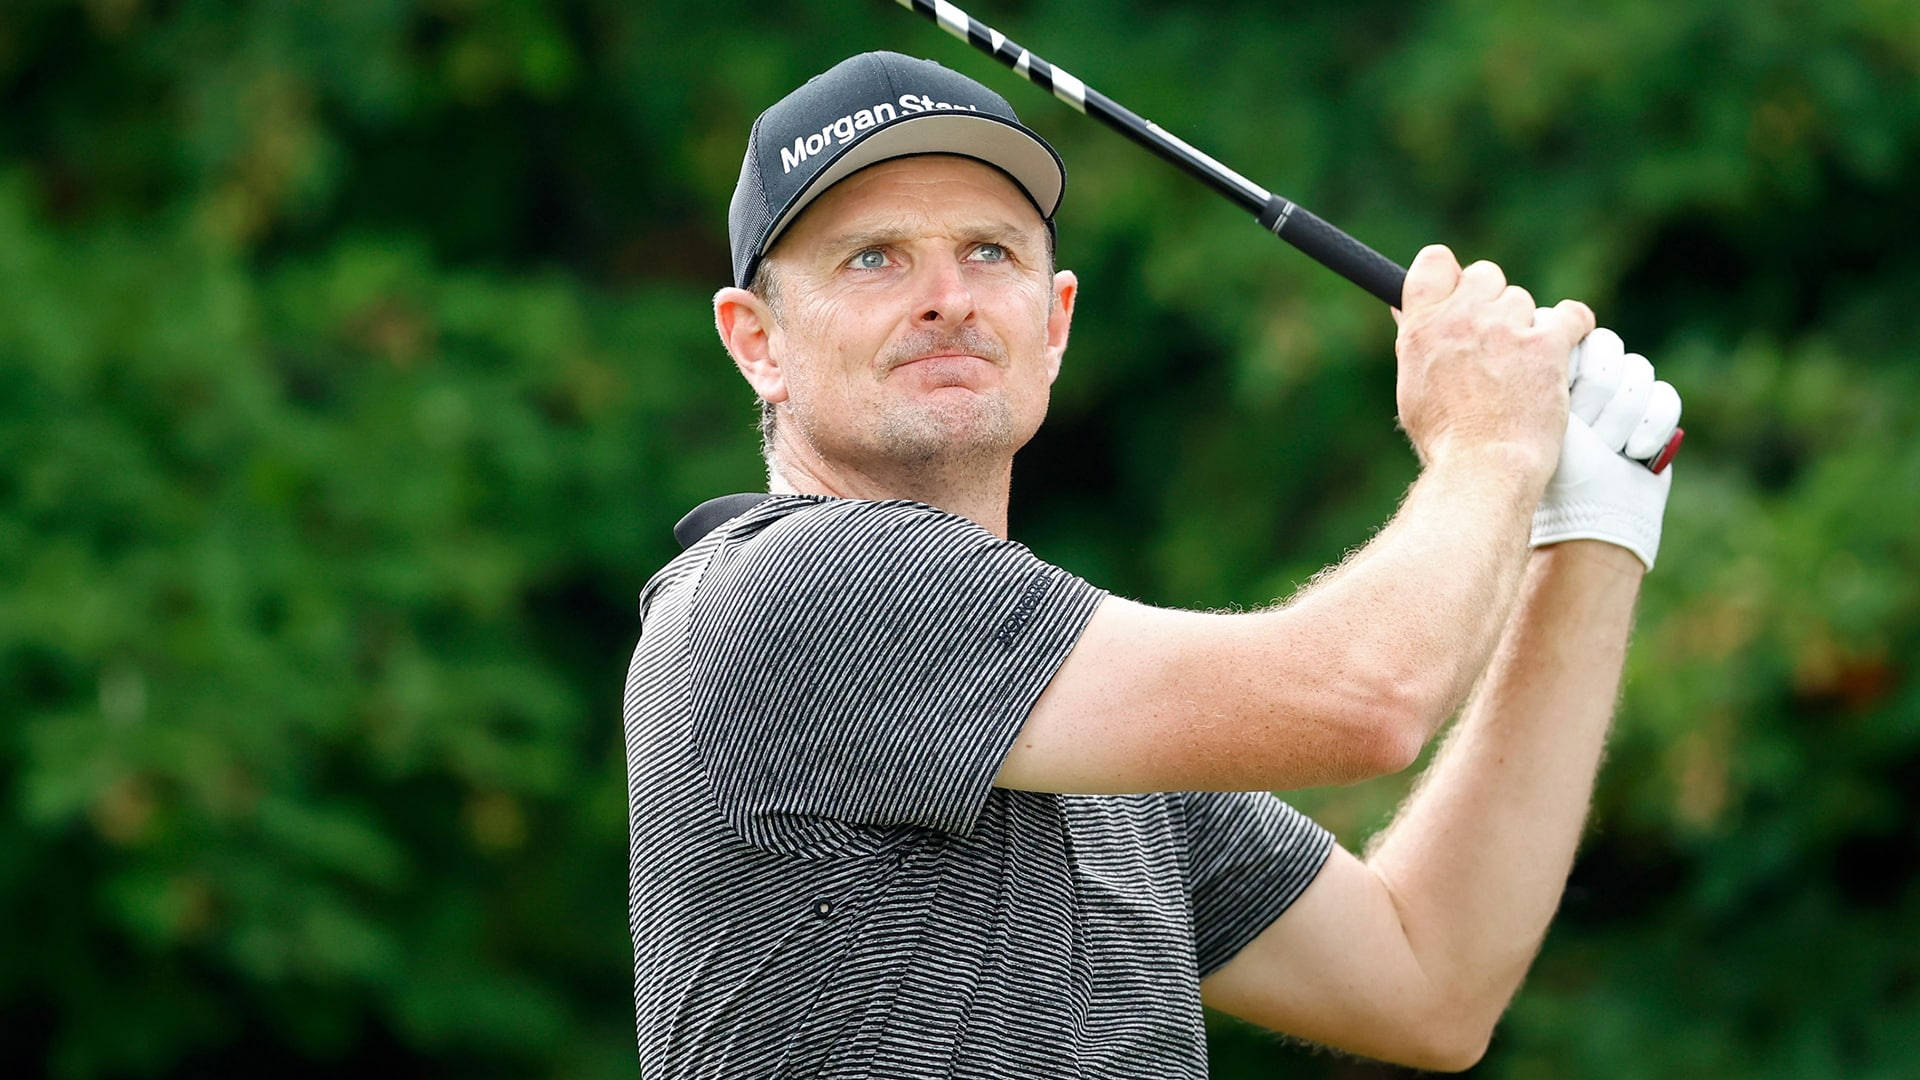 Professional Golfer - Justin Rose in Action Wallpaper